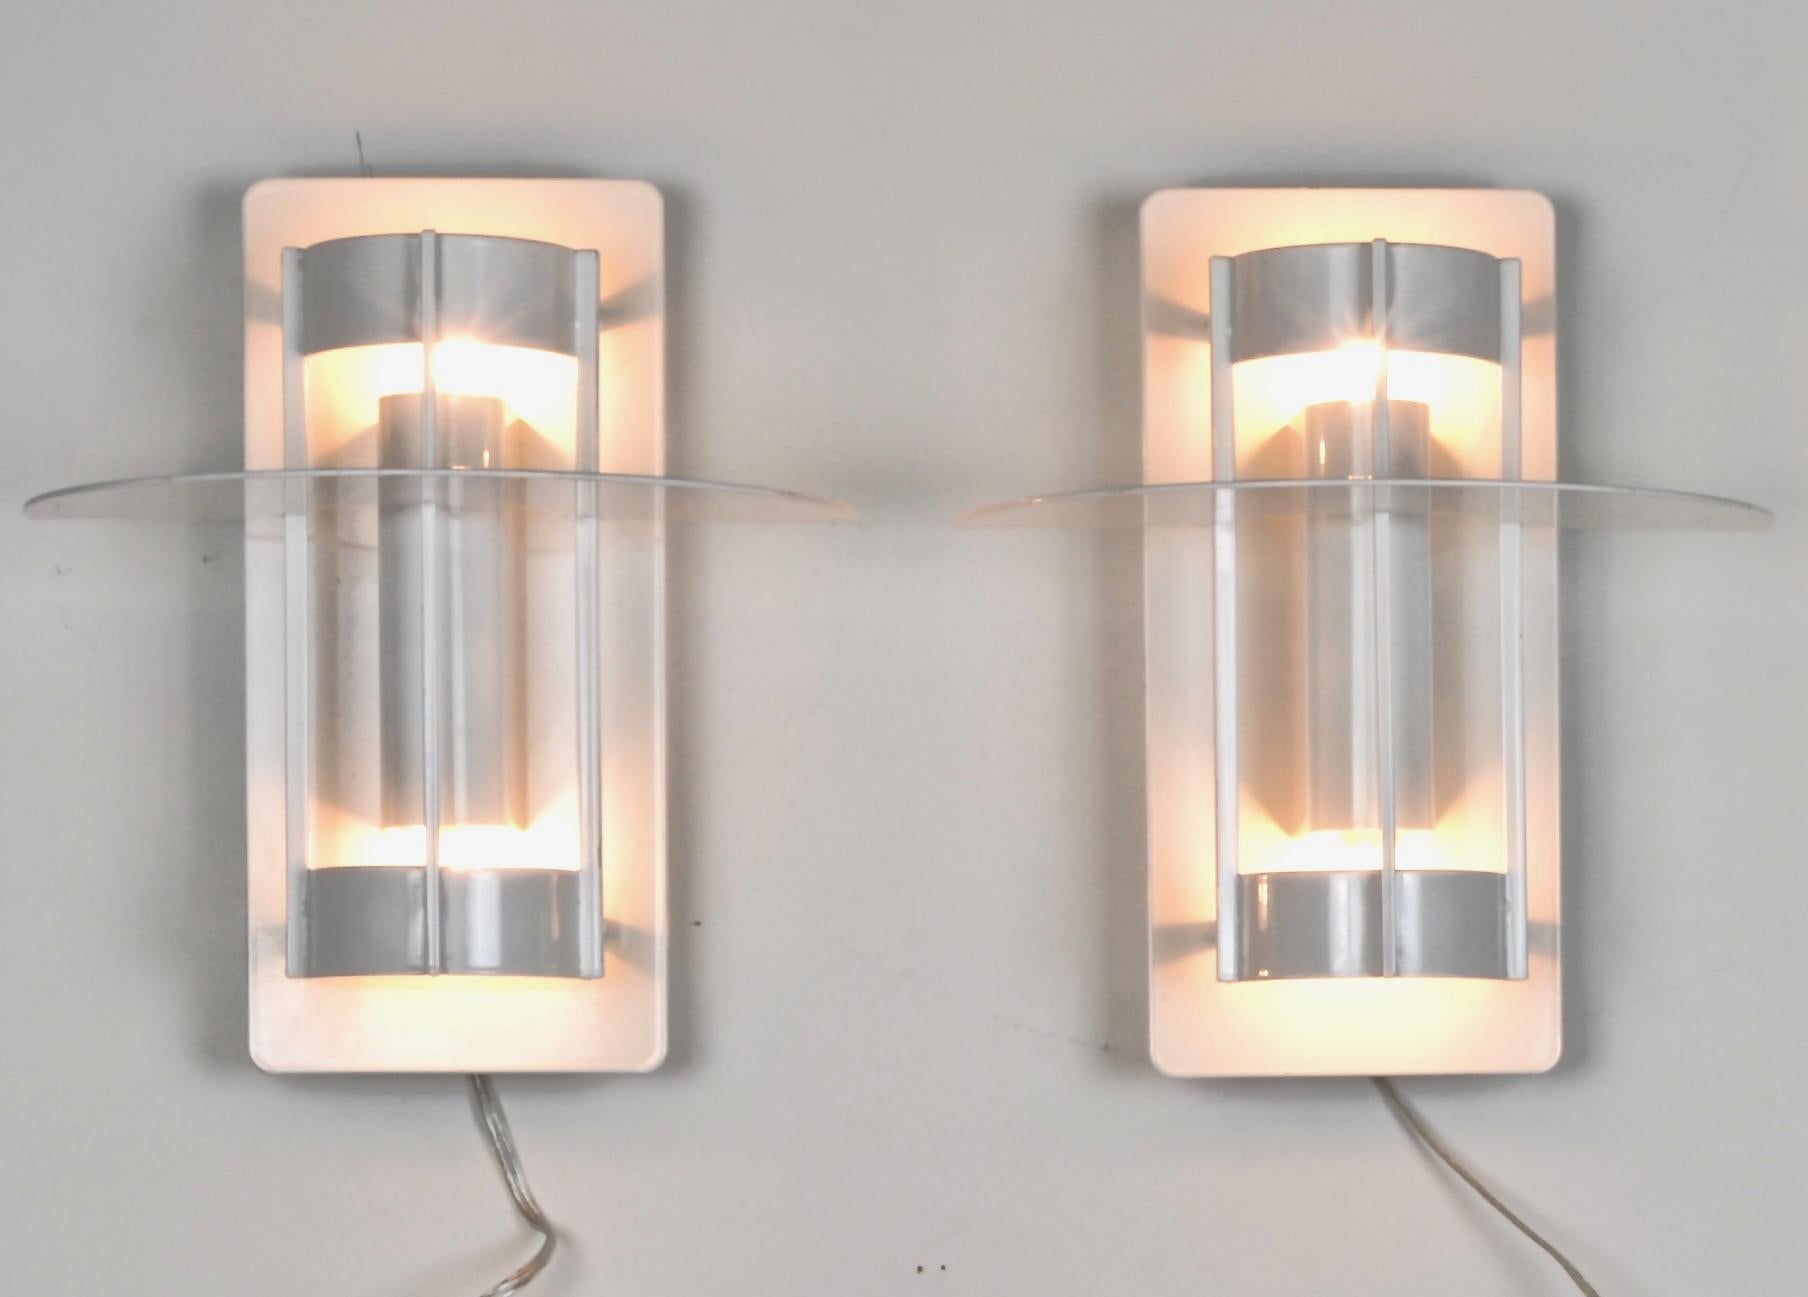 A pair of these modern classic sconces designed by Louis Poulsen. Each newly wired, replacing original florescent fittings with incandescent lights. Single bulbs facing up and down. Very nice quality fixtures. Powder-coated in gloss white. 